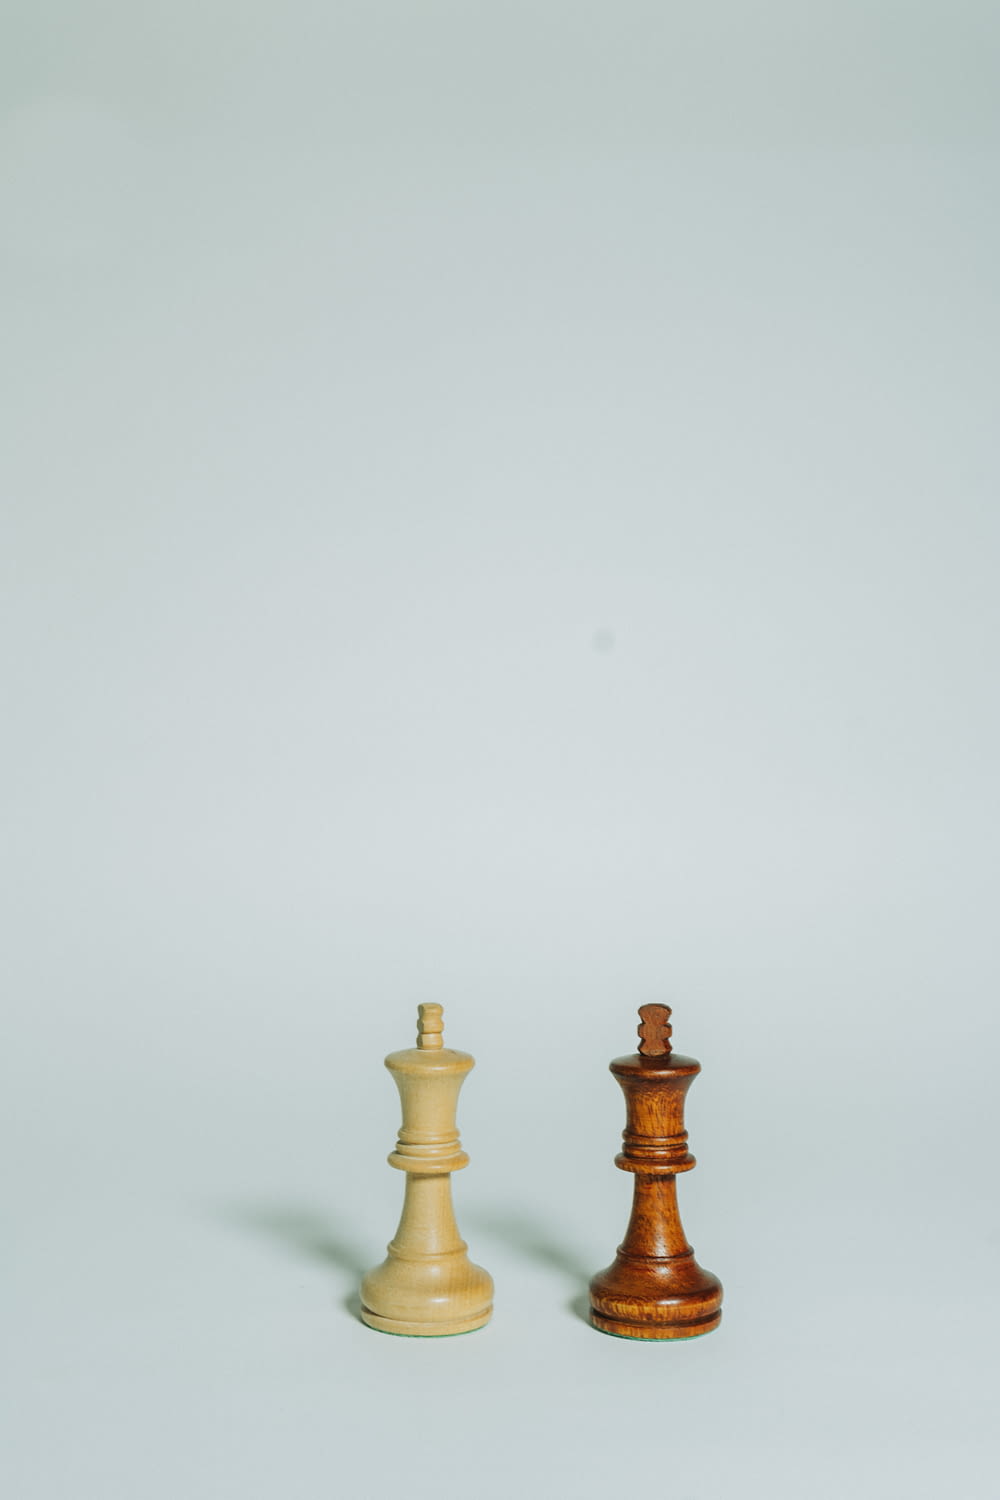 a wooden chess piece next to a wooden chess piece